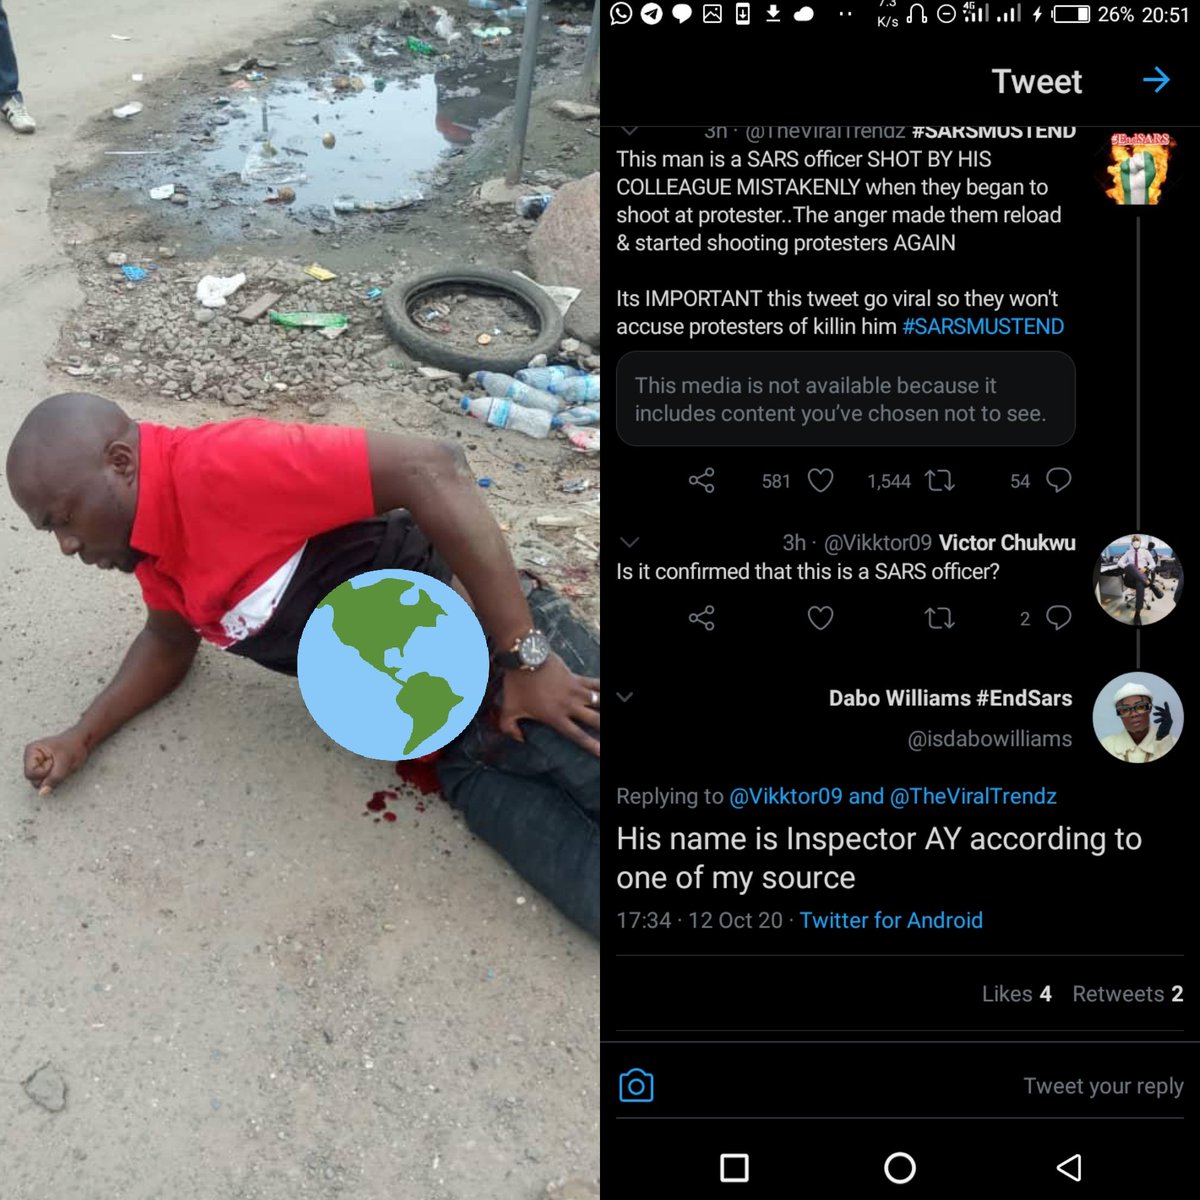 In the earlier thread posted, a twitter user had identified the officer to be "inspector AY"... That name was further confirmed as Erinfolami Ayodeji in the tweet posted chief press secretary of Lagos state. What was he doing among protesters prior to when the shooting began??